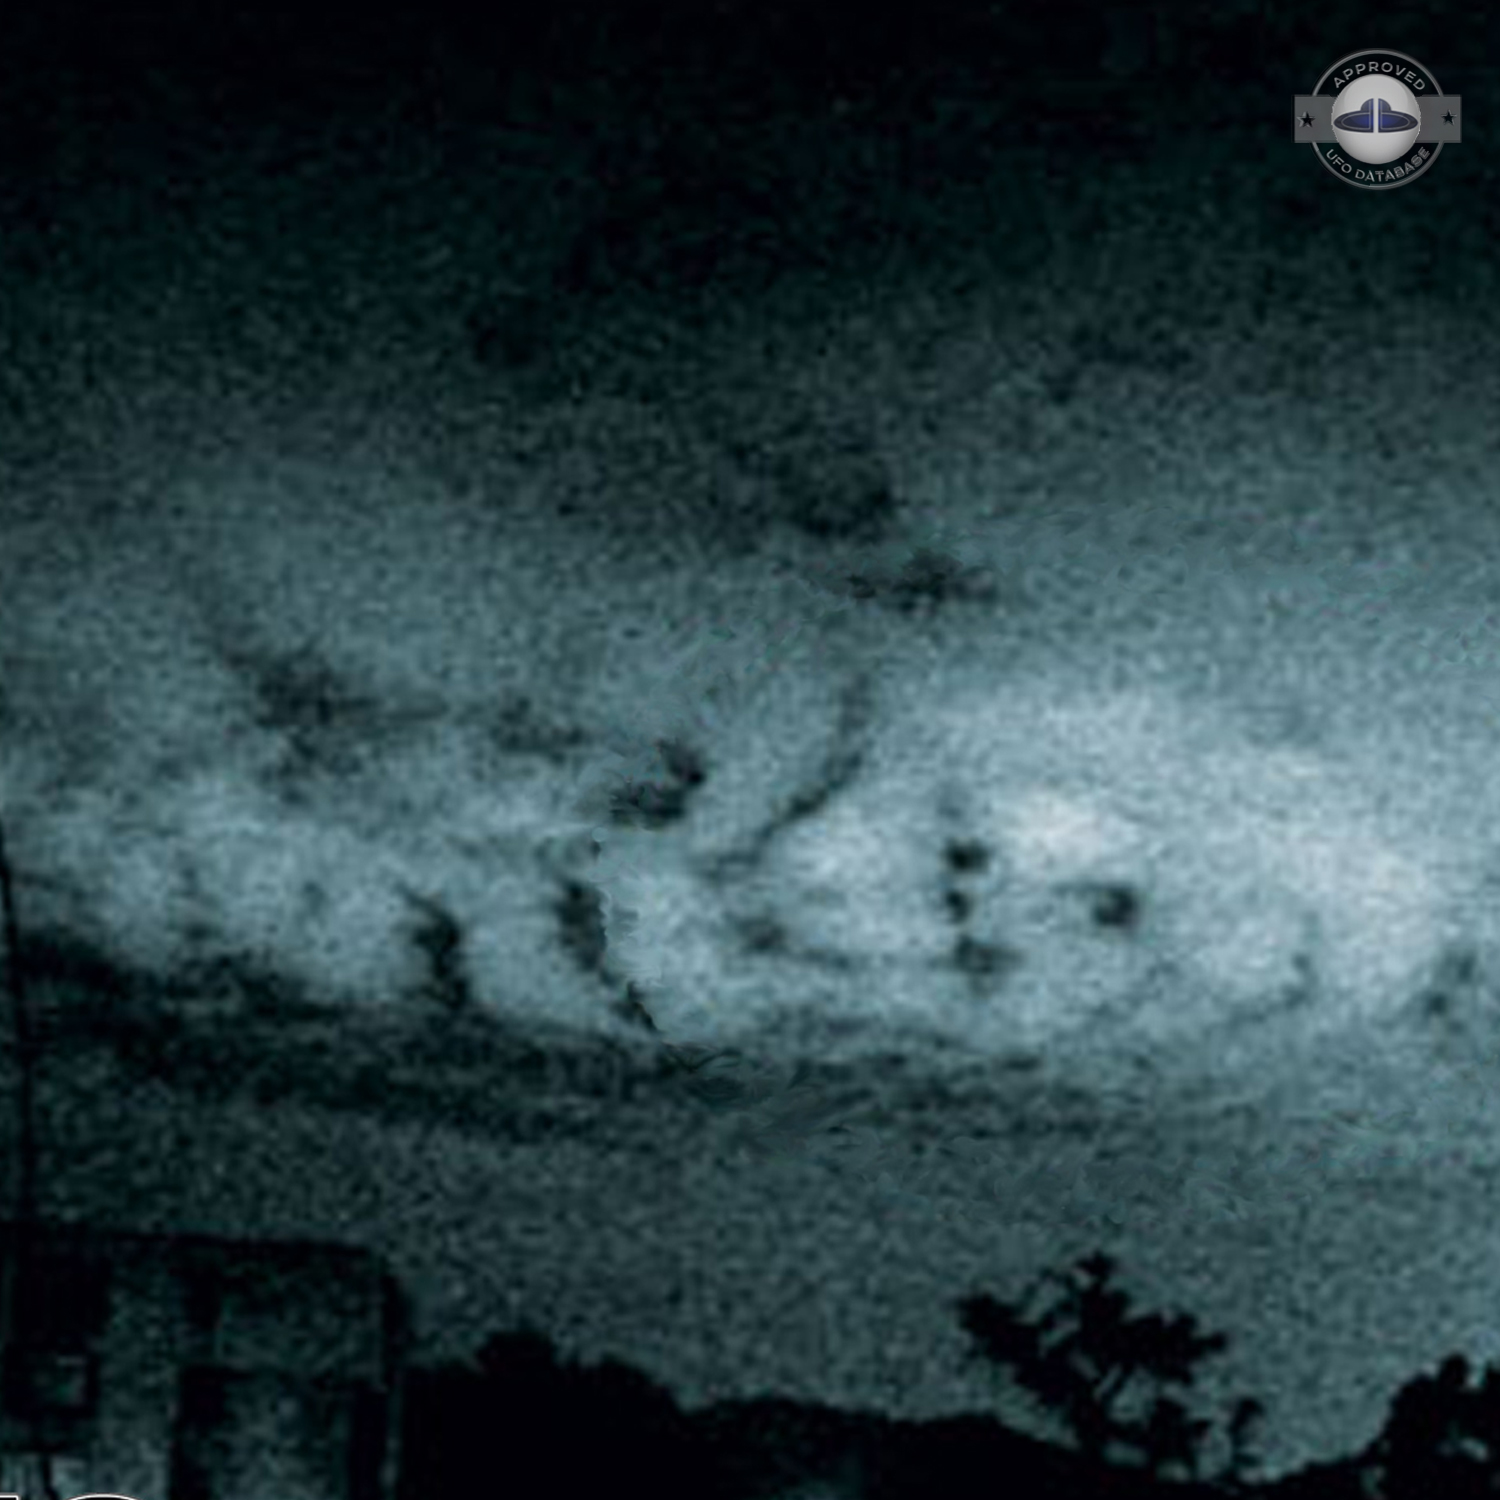 Huge UFO mothership moving in clouds over Guangzhou, Guangdong, China UFO Picture #176-3